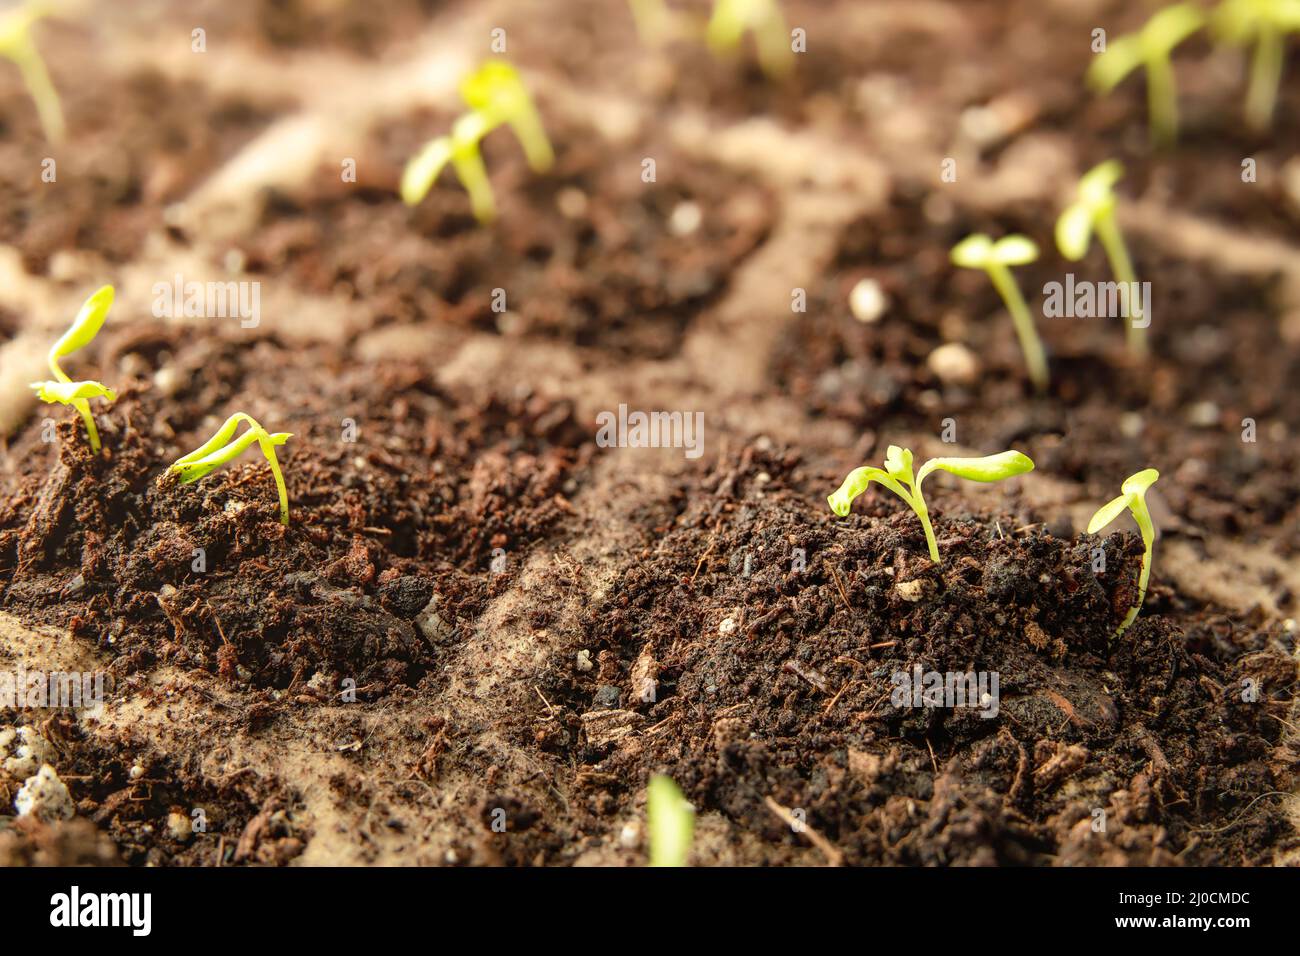 Tiny celery plant seedlings with cotyledons and first true leaves, close up. Celery or celeriac plants in seed starter tray with potting soil, indoors Stock Photo